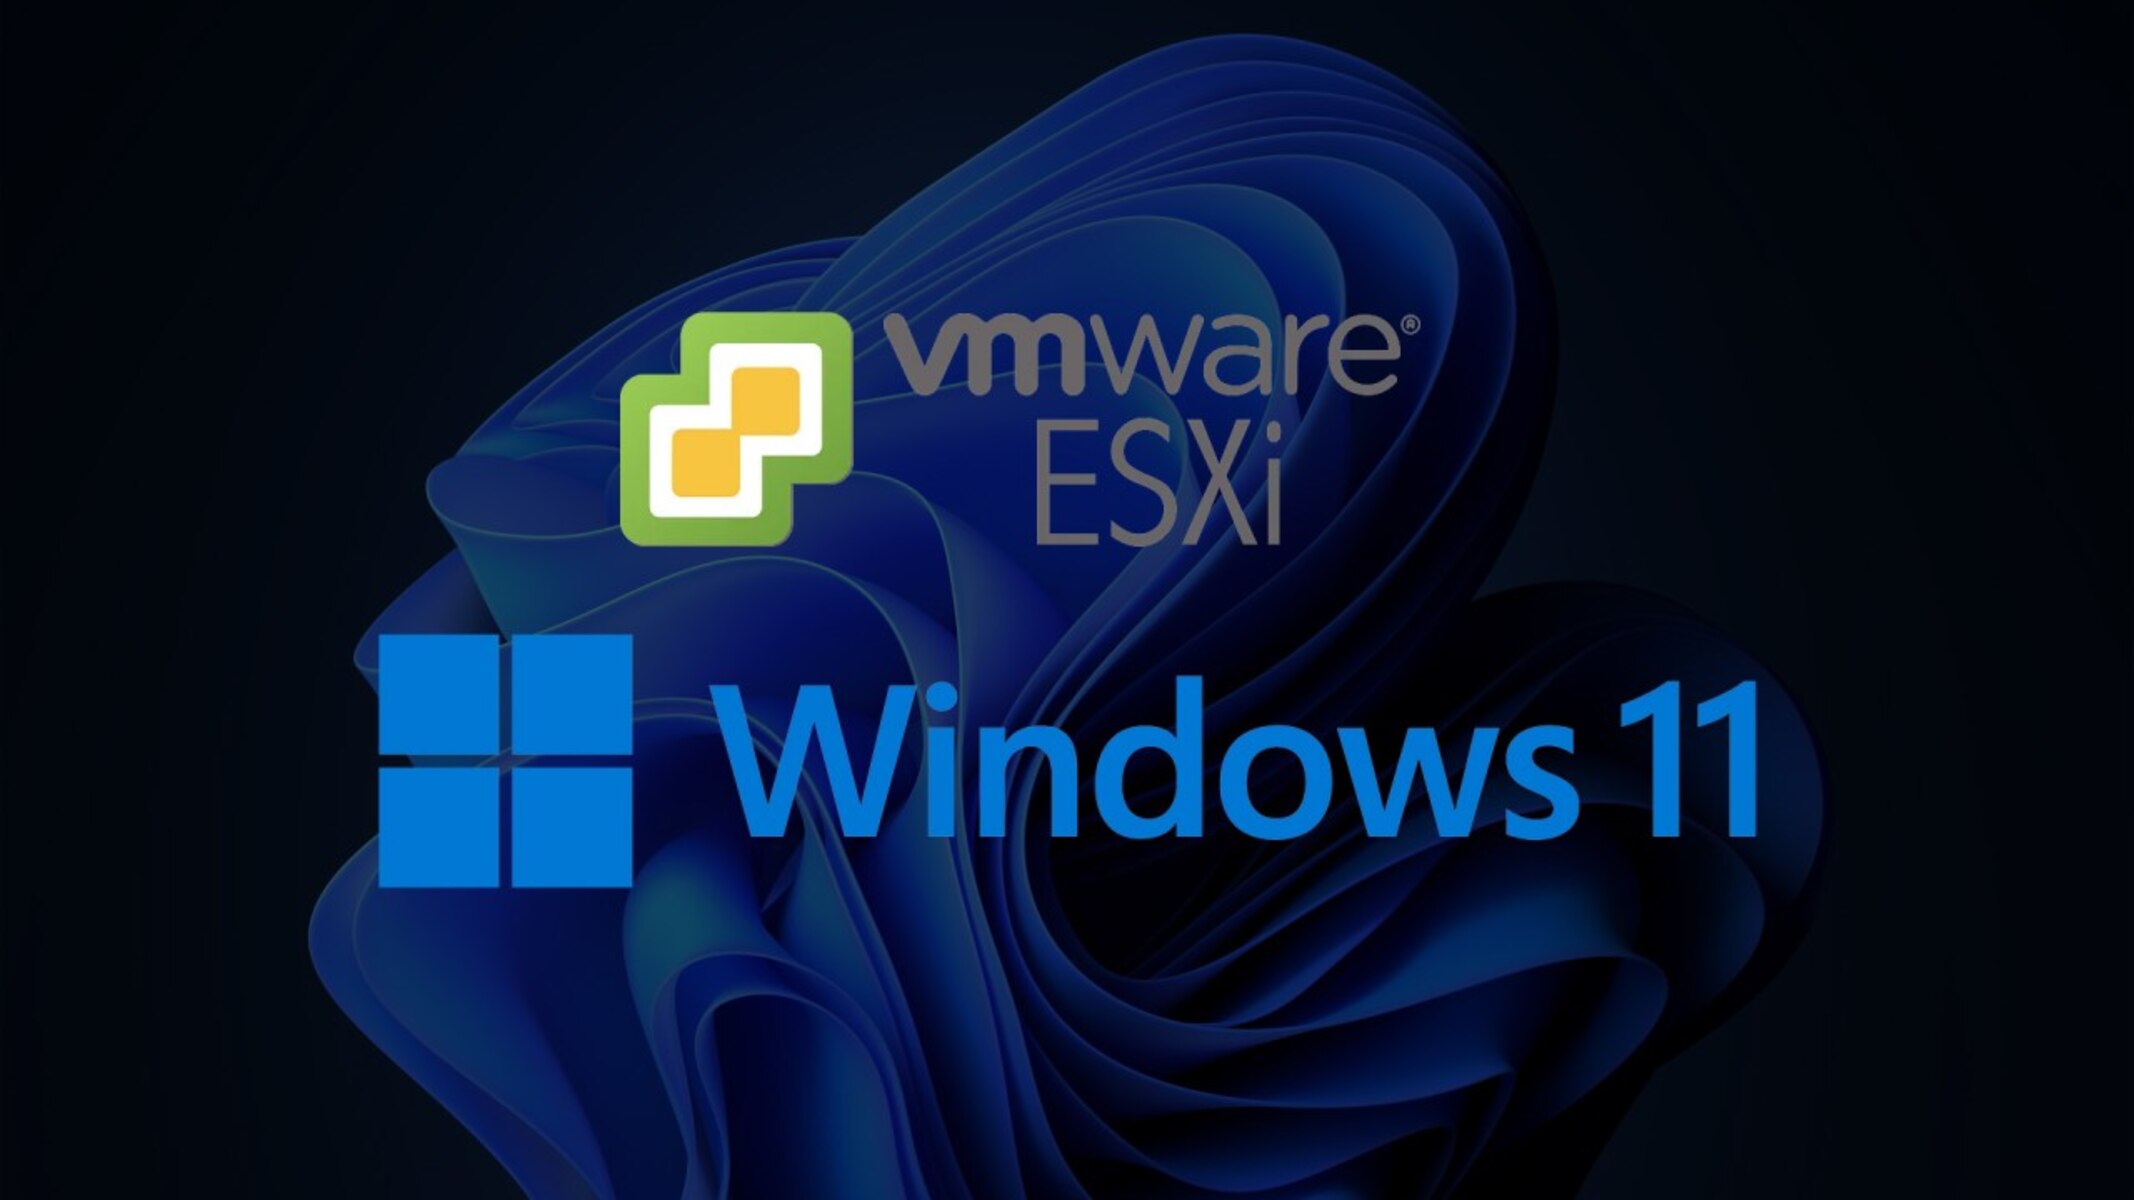 How To Install ESXi On VMware Workstation